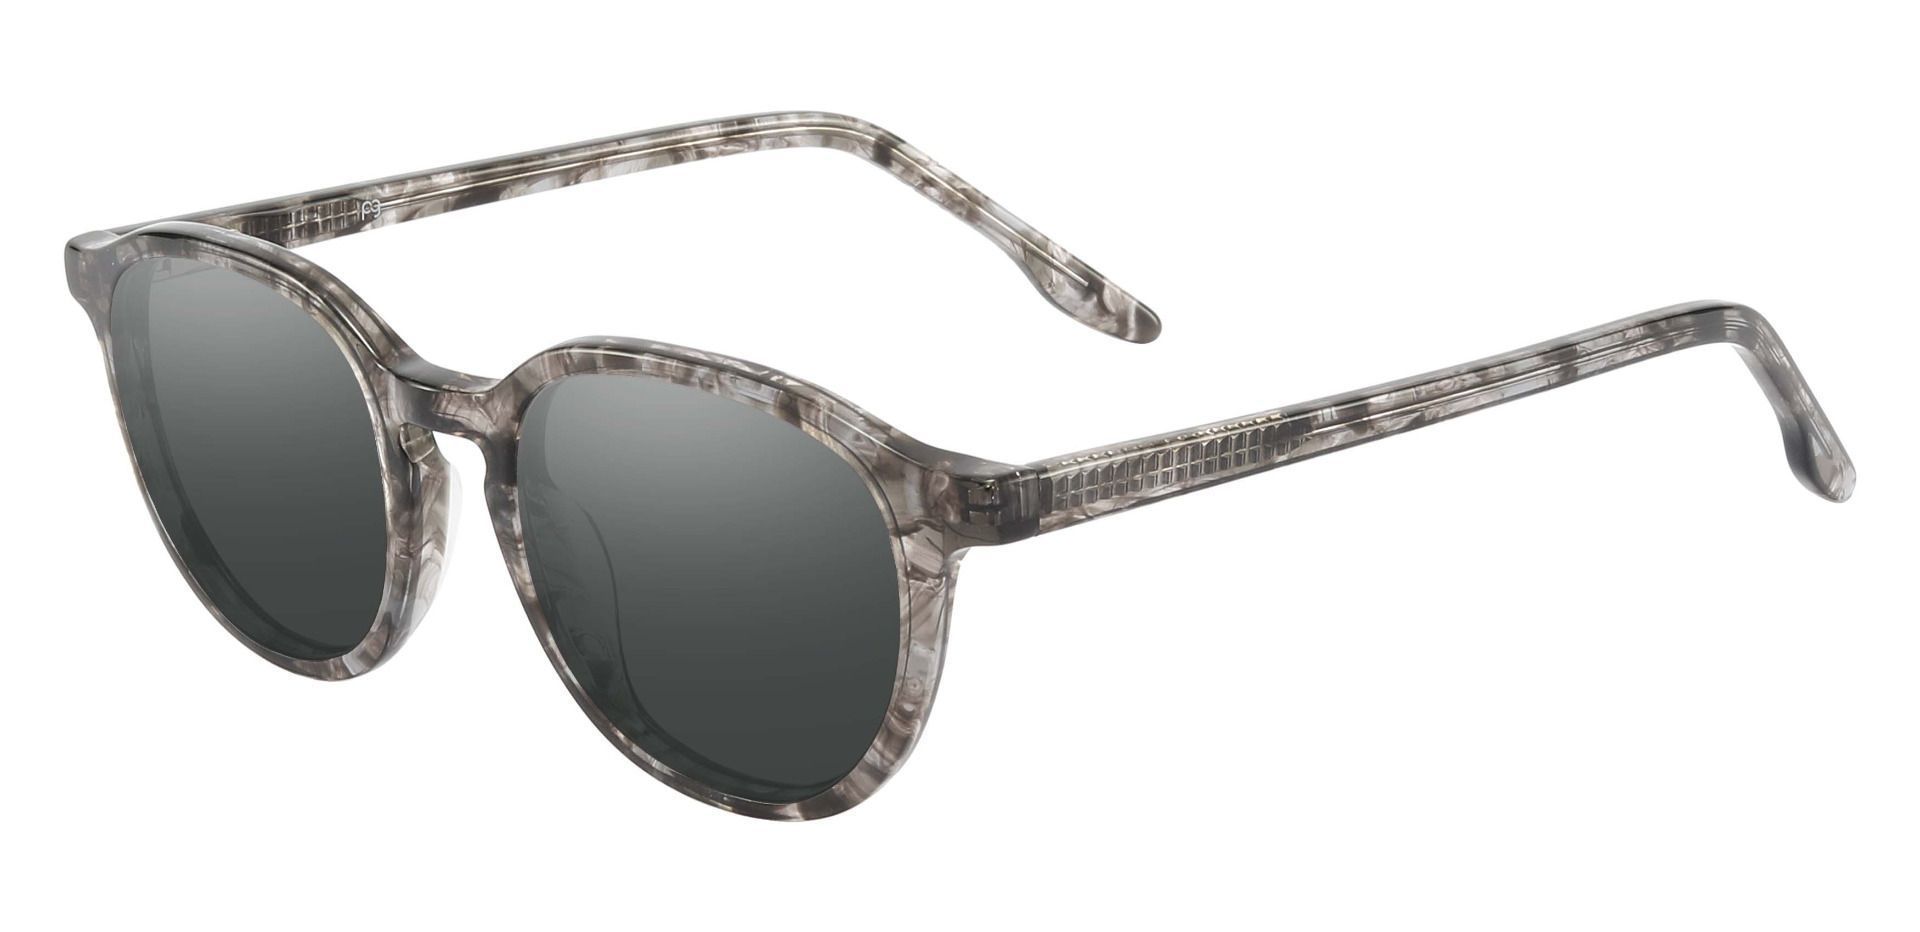 Ashley Oval Lined Bifocal Sunglasses - Gray Frame With Gray Lenses